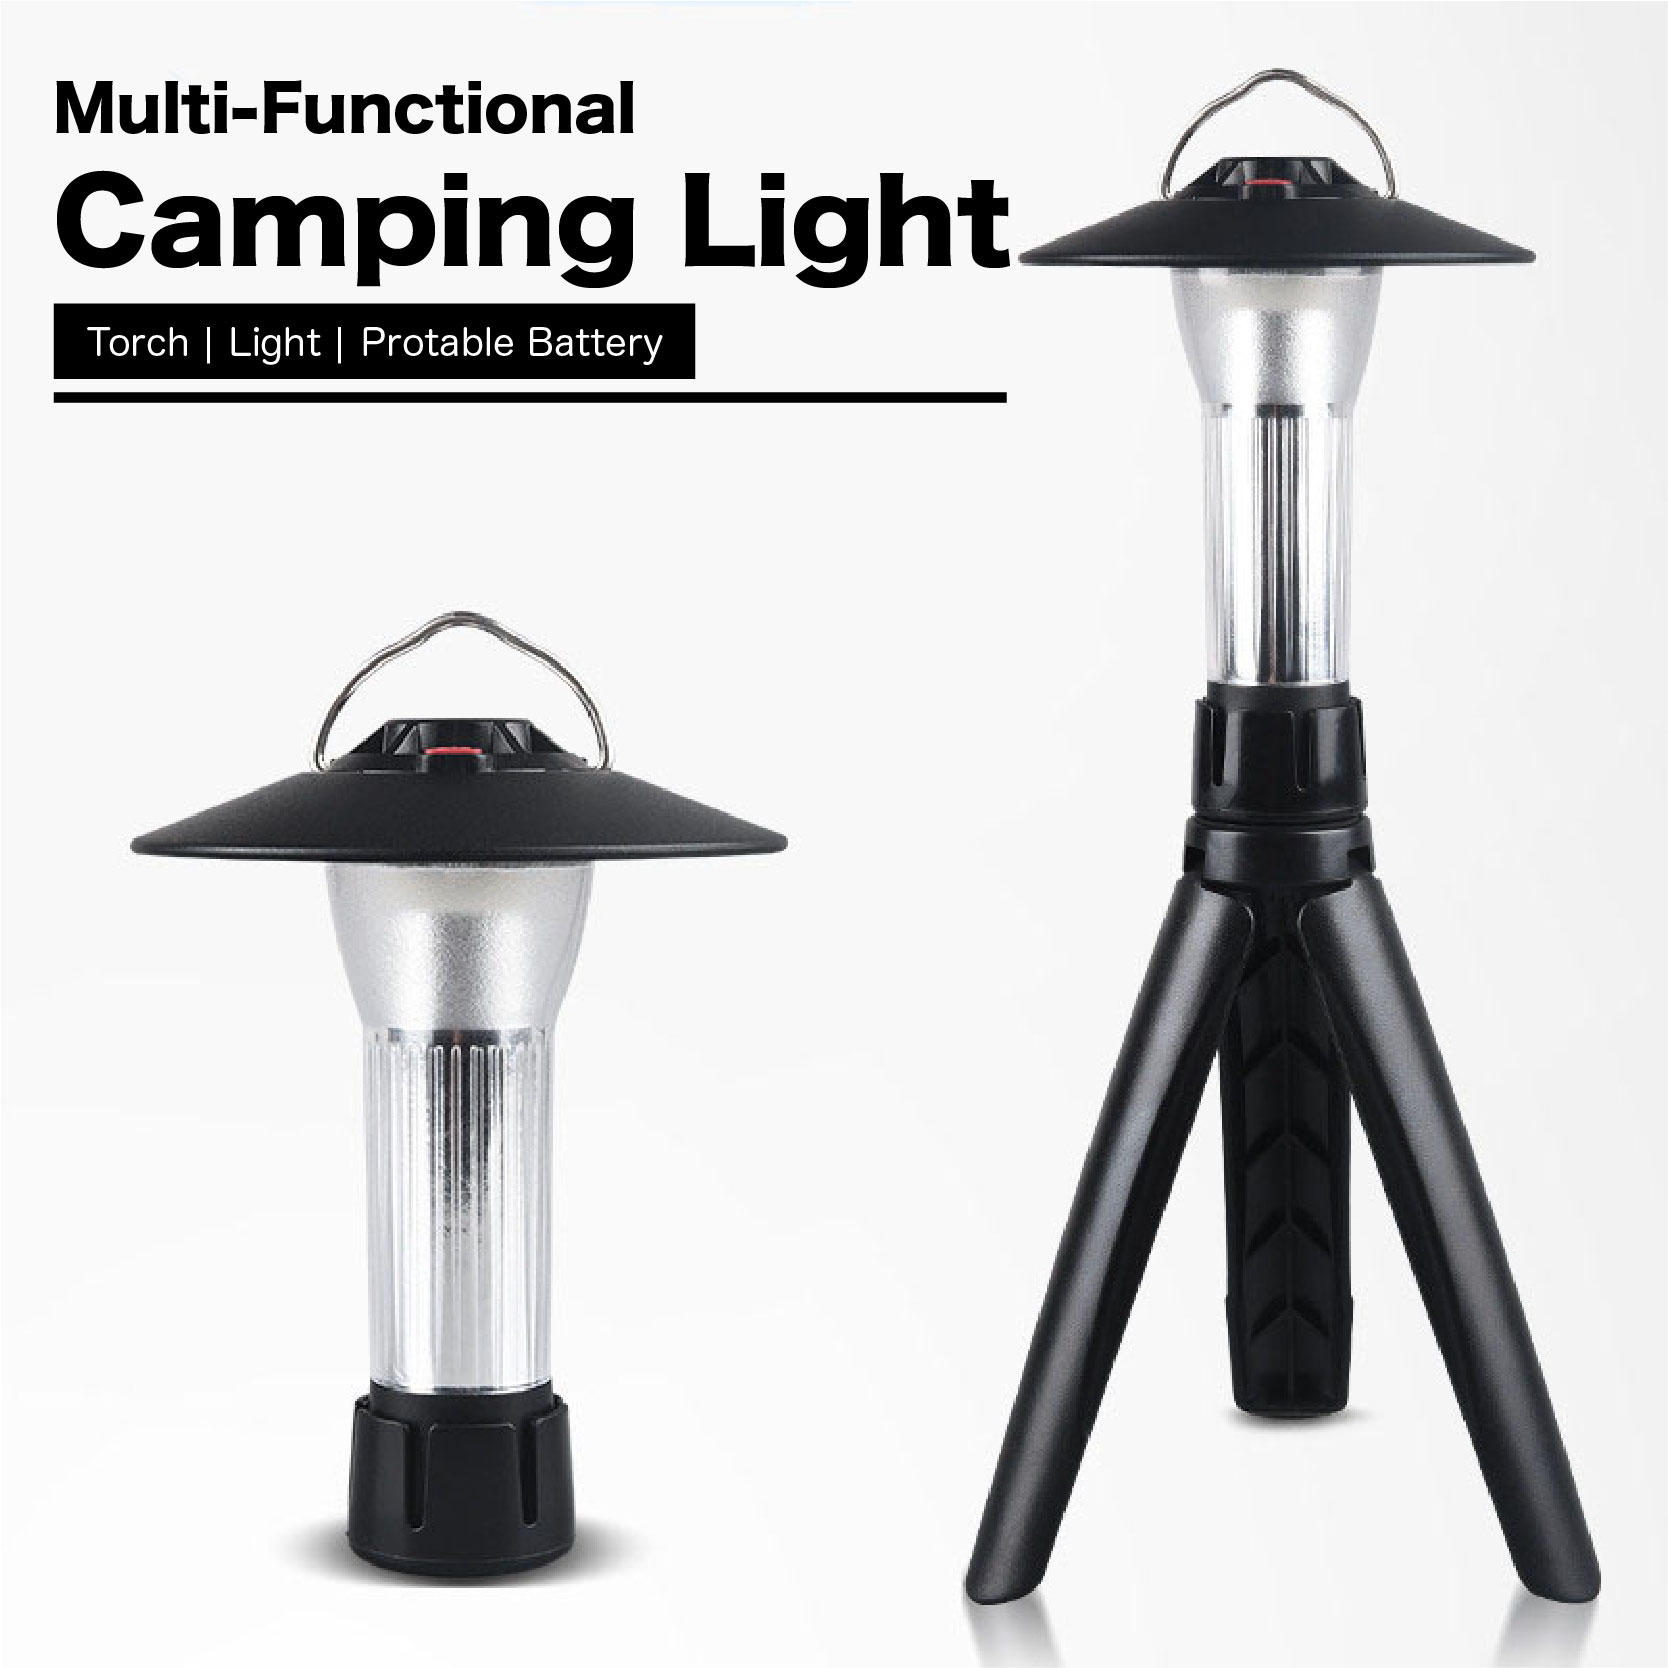 Multi-Functional Durable Camping Light – All Peaks